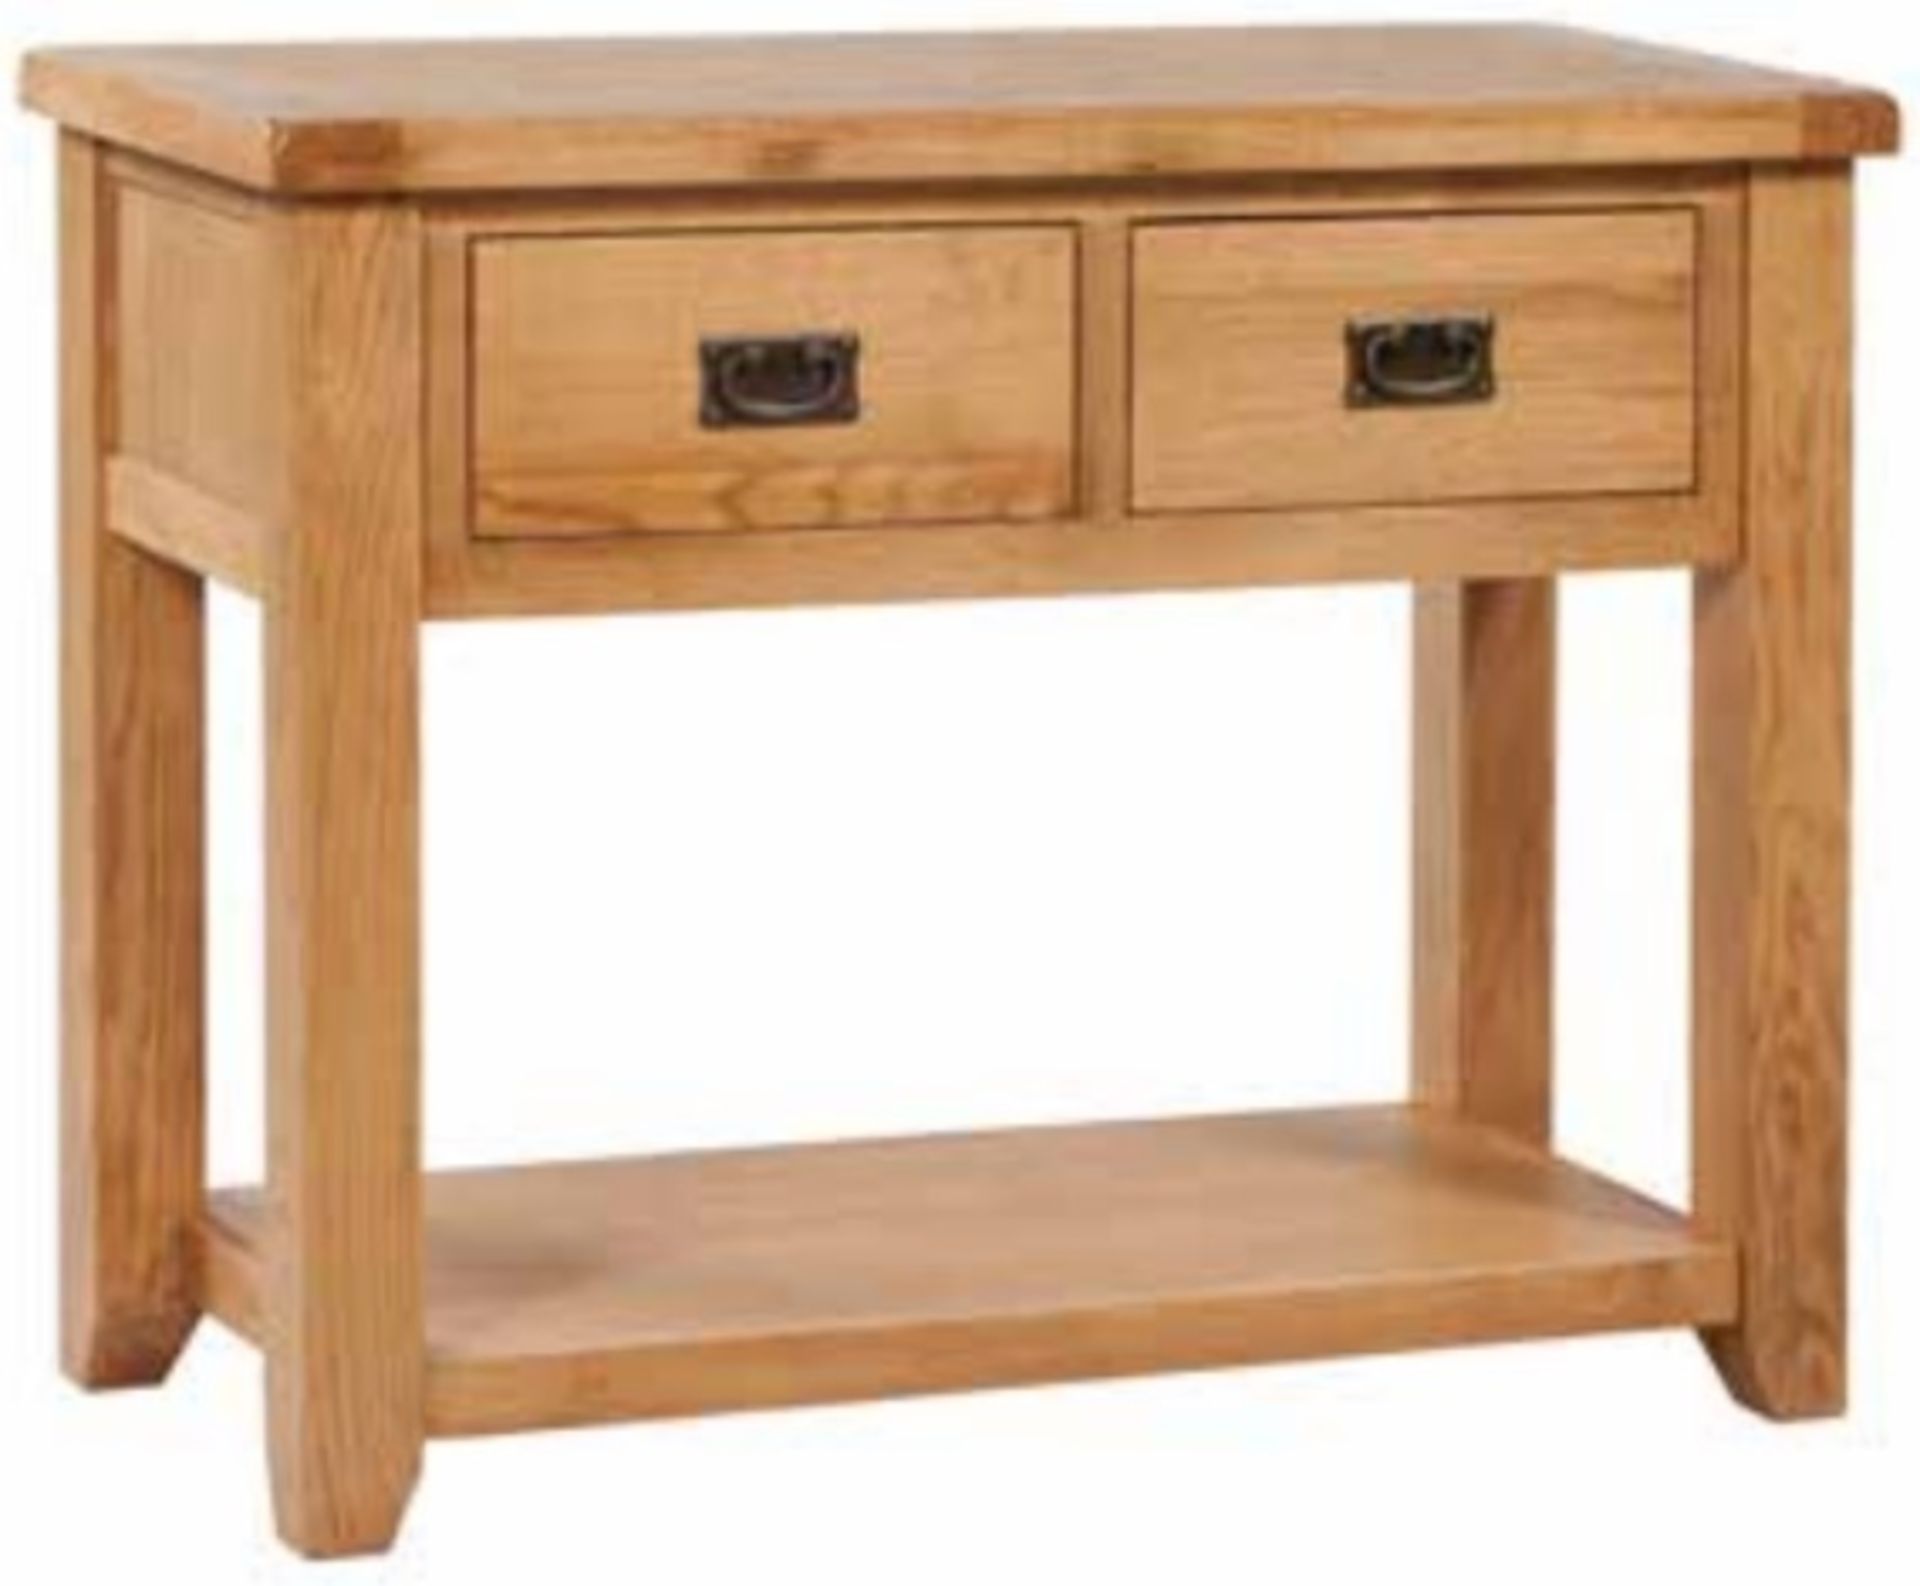 V Brand New Chiswick Oak Large Console Table 100w x 45d x 80.5h cms ISP £284.00 (